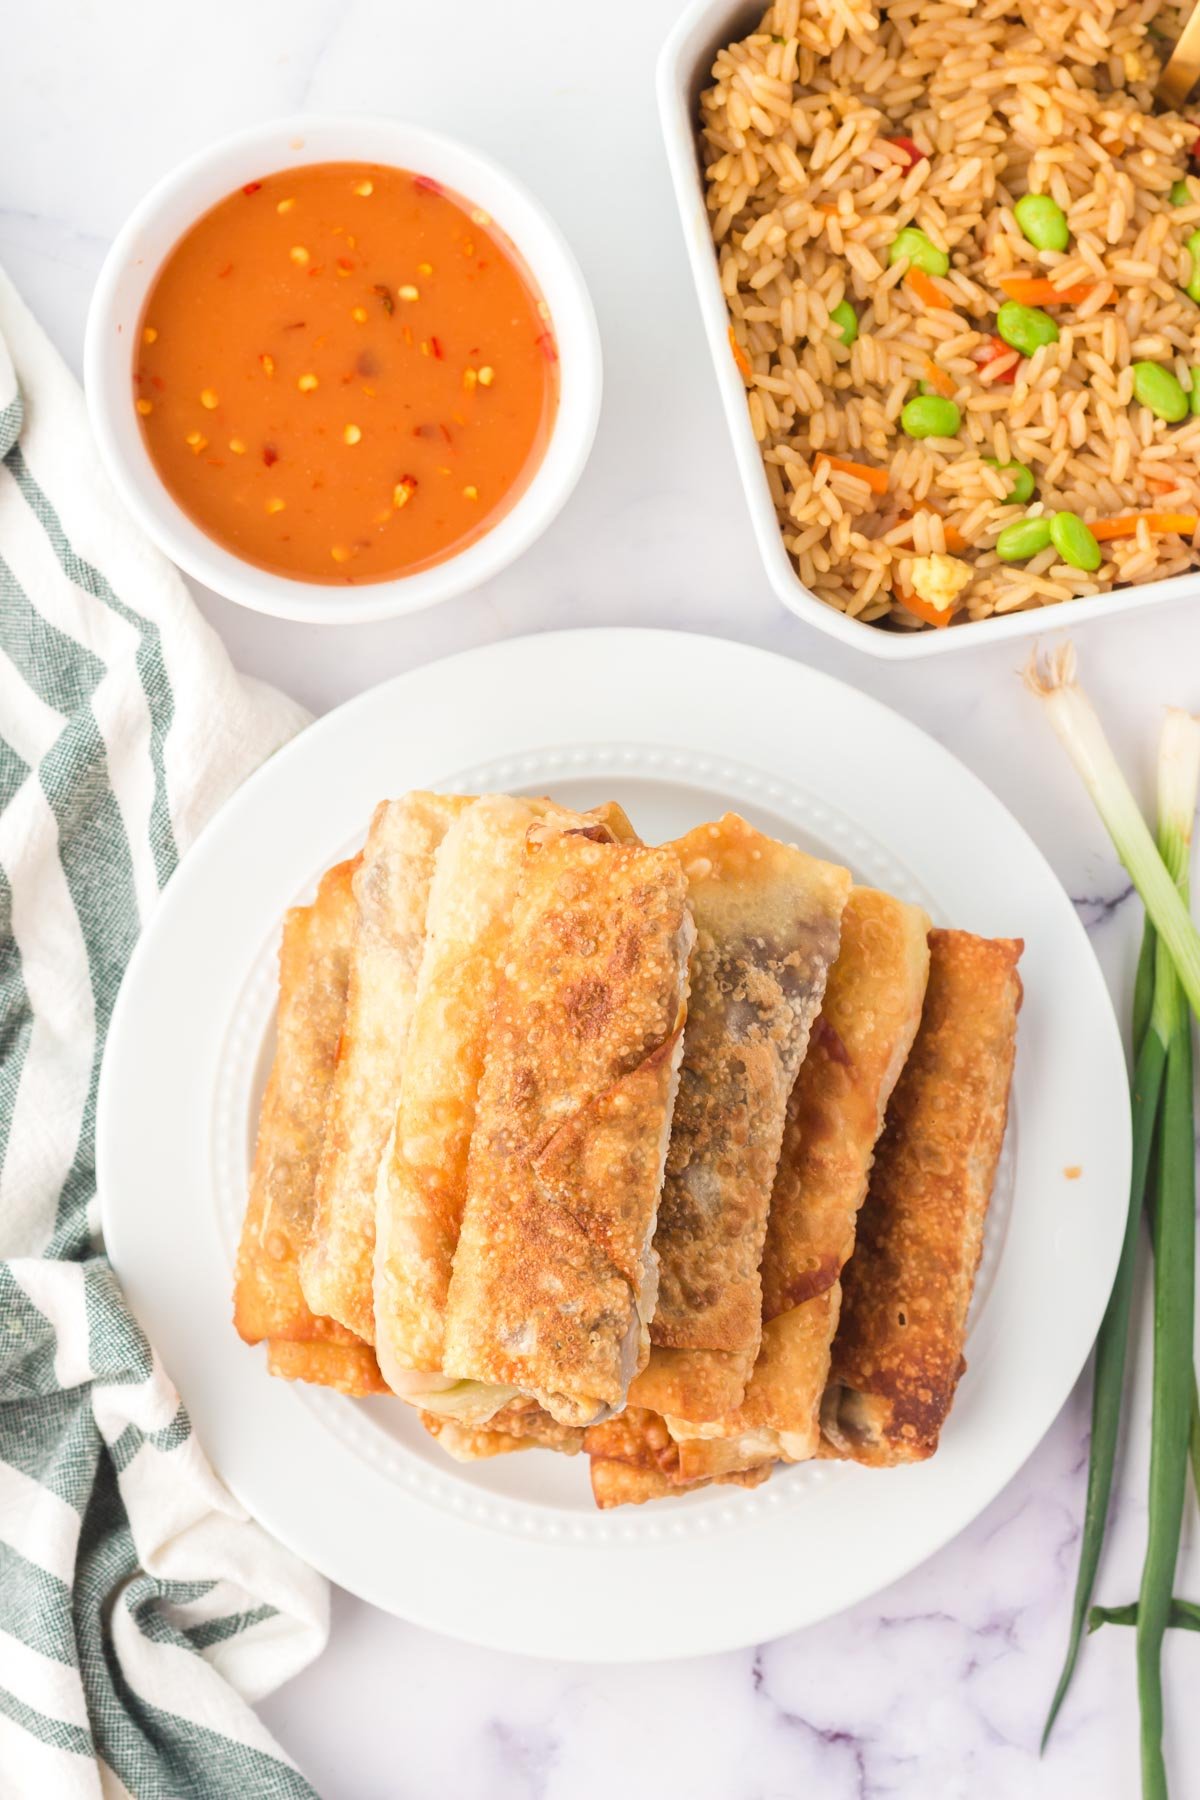 fried egg rolls on a plate, a dish of sweet and sour sauce and a plate of fried rice.